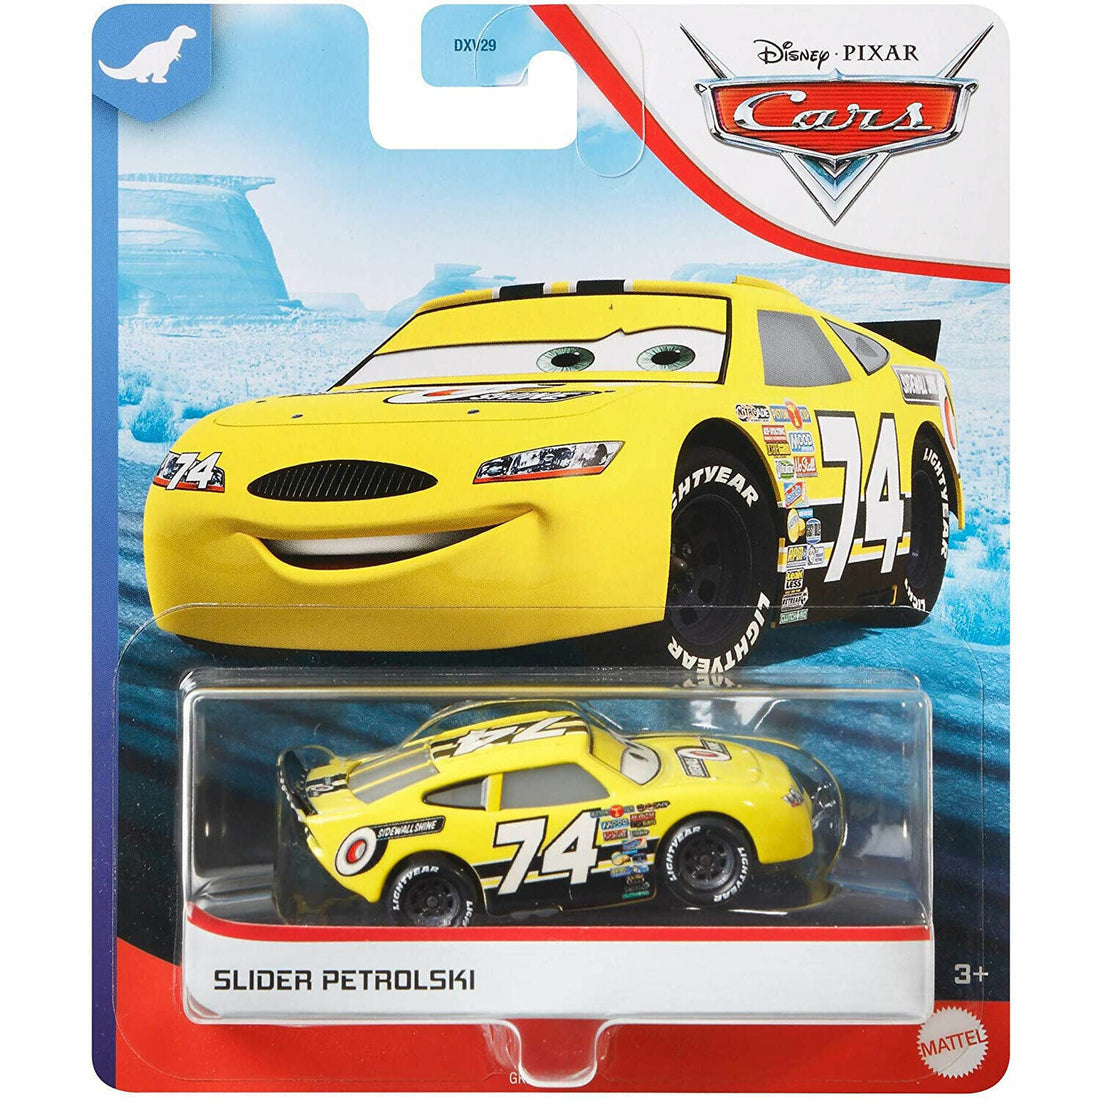 "Disney Pixar Cars Toy Collection: 1:55 Scale - Unleash the Speed and Adventure! - SLIDER PETROLSKI (2019)